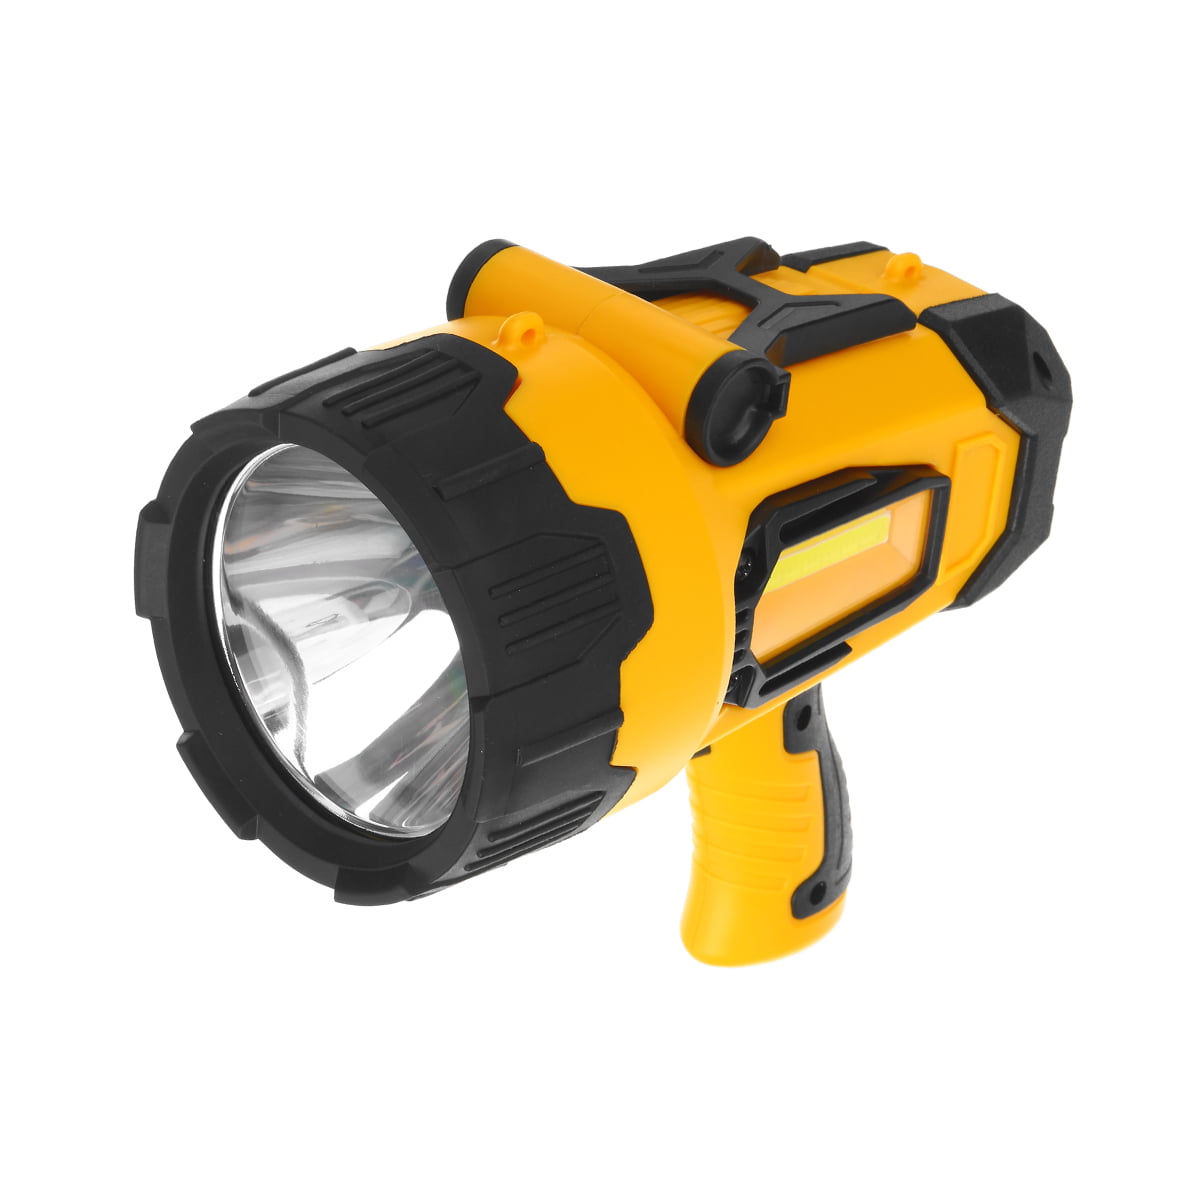 Lamp Searchlights LED Rechargeable Light Spotlight Hand Held Torch Flashlight 